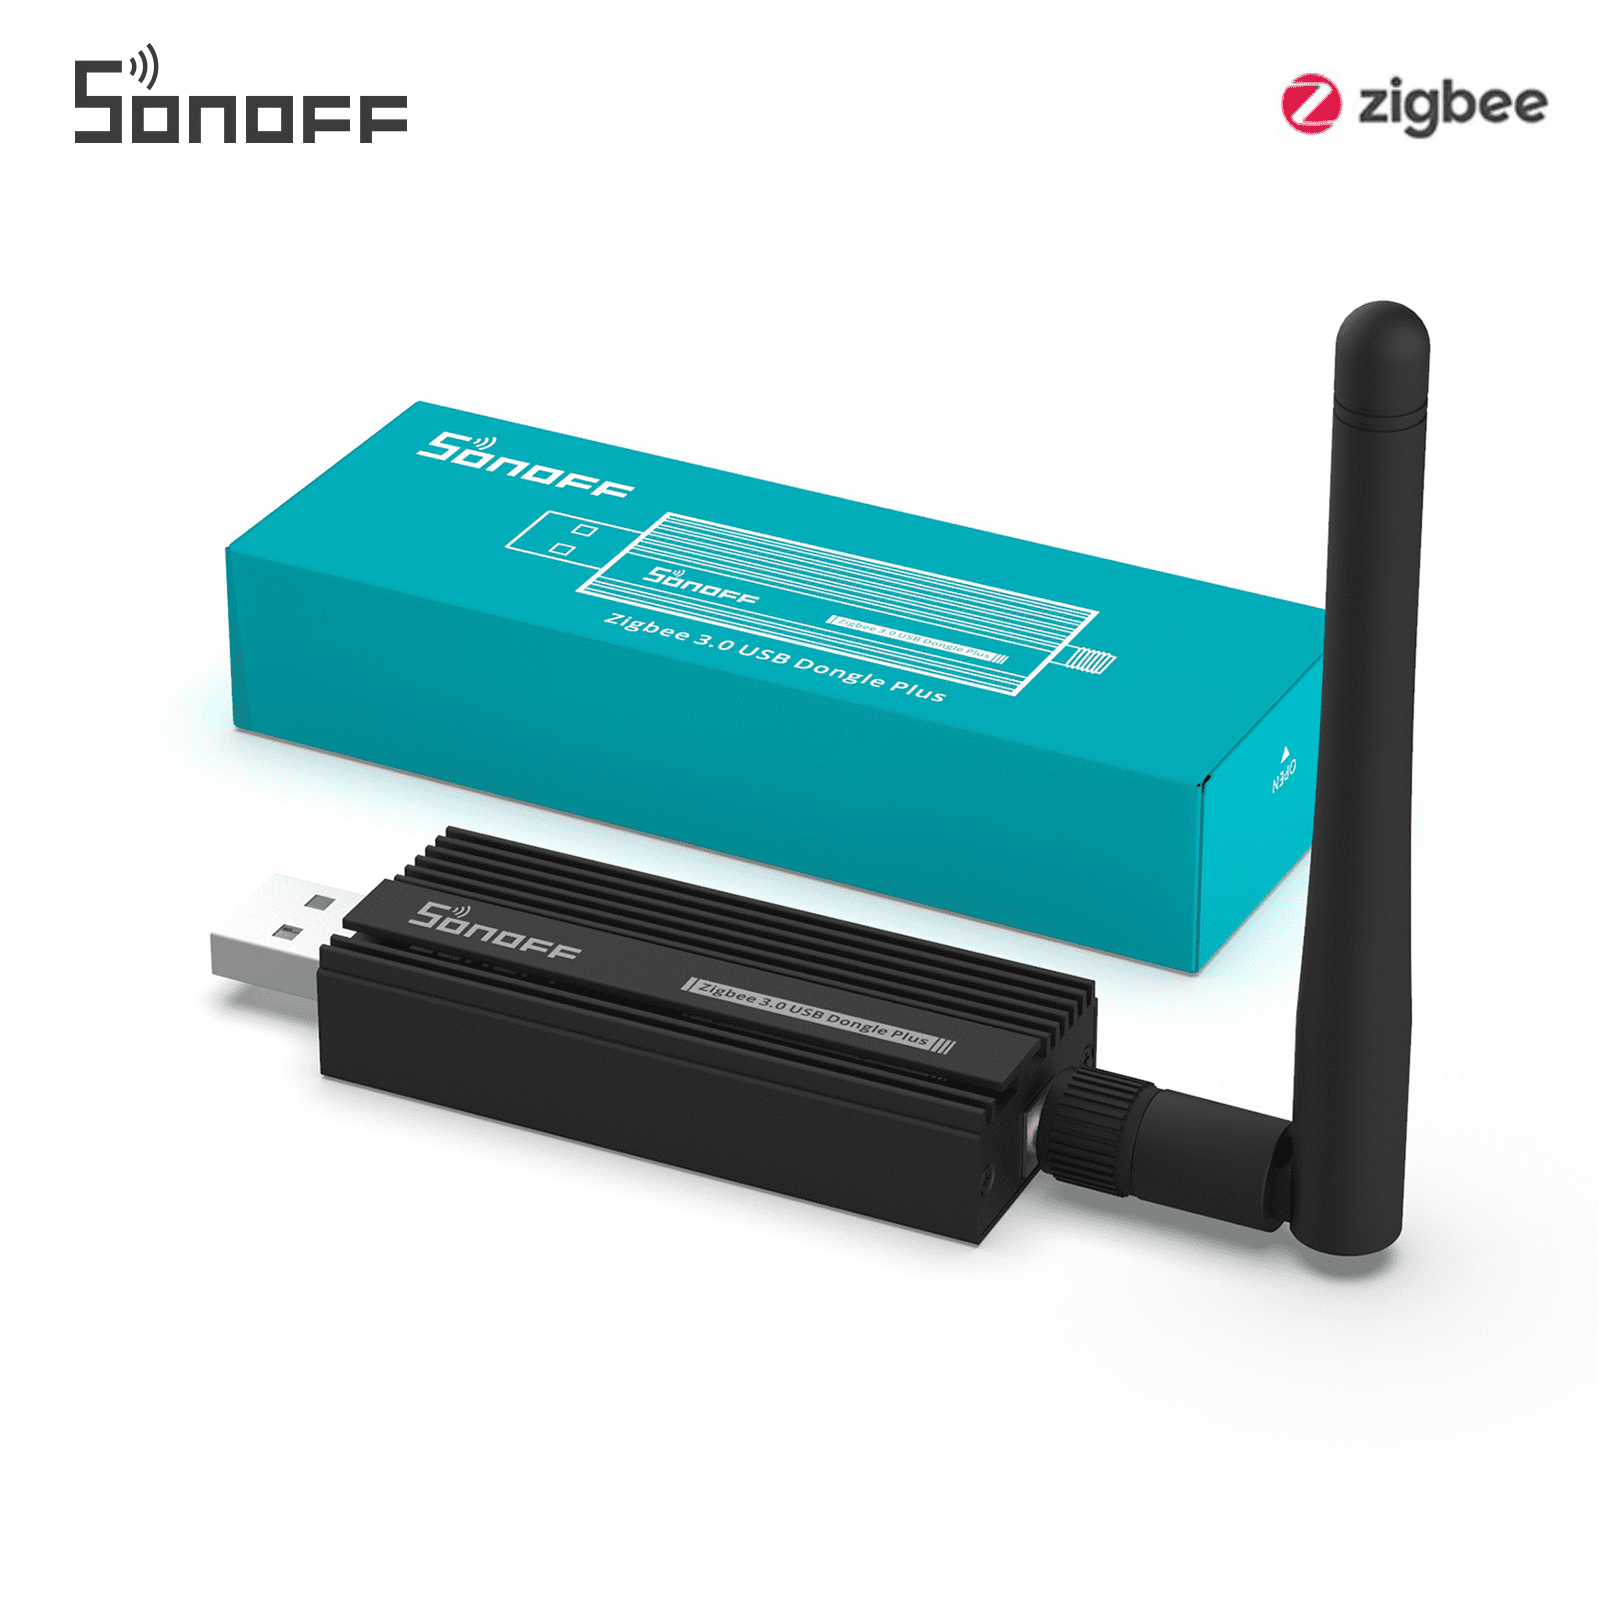 Sonoff Zigbee 3.0 Dongle wall mount by whocares333